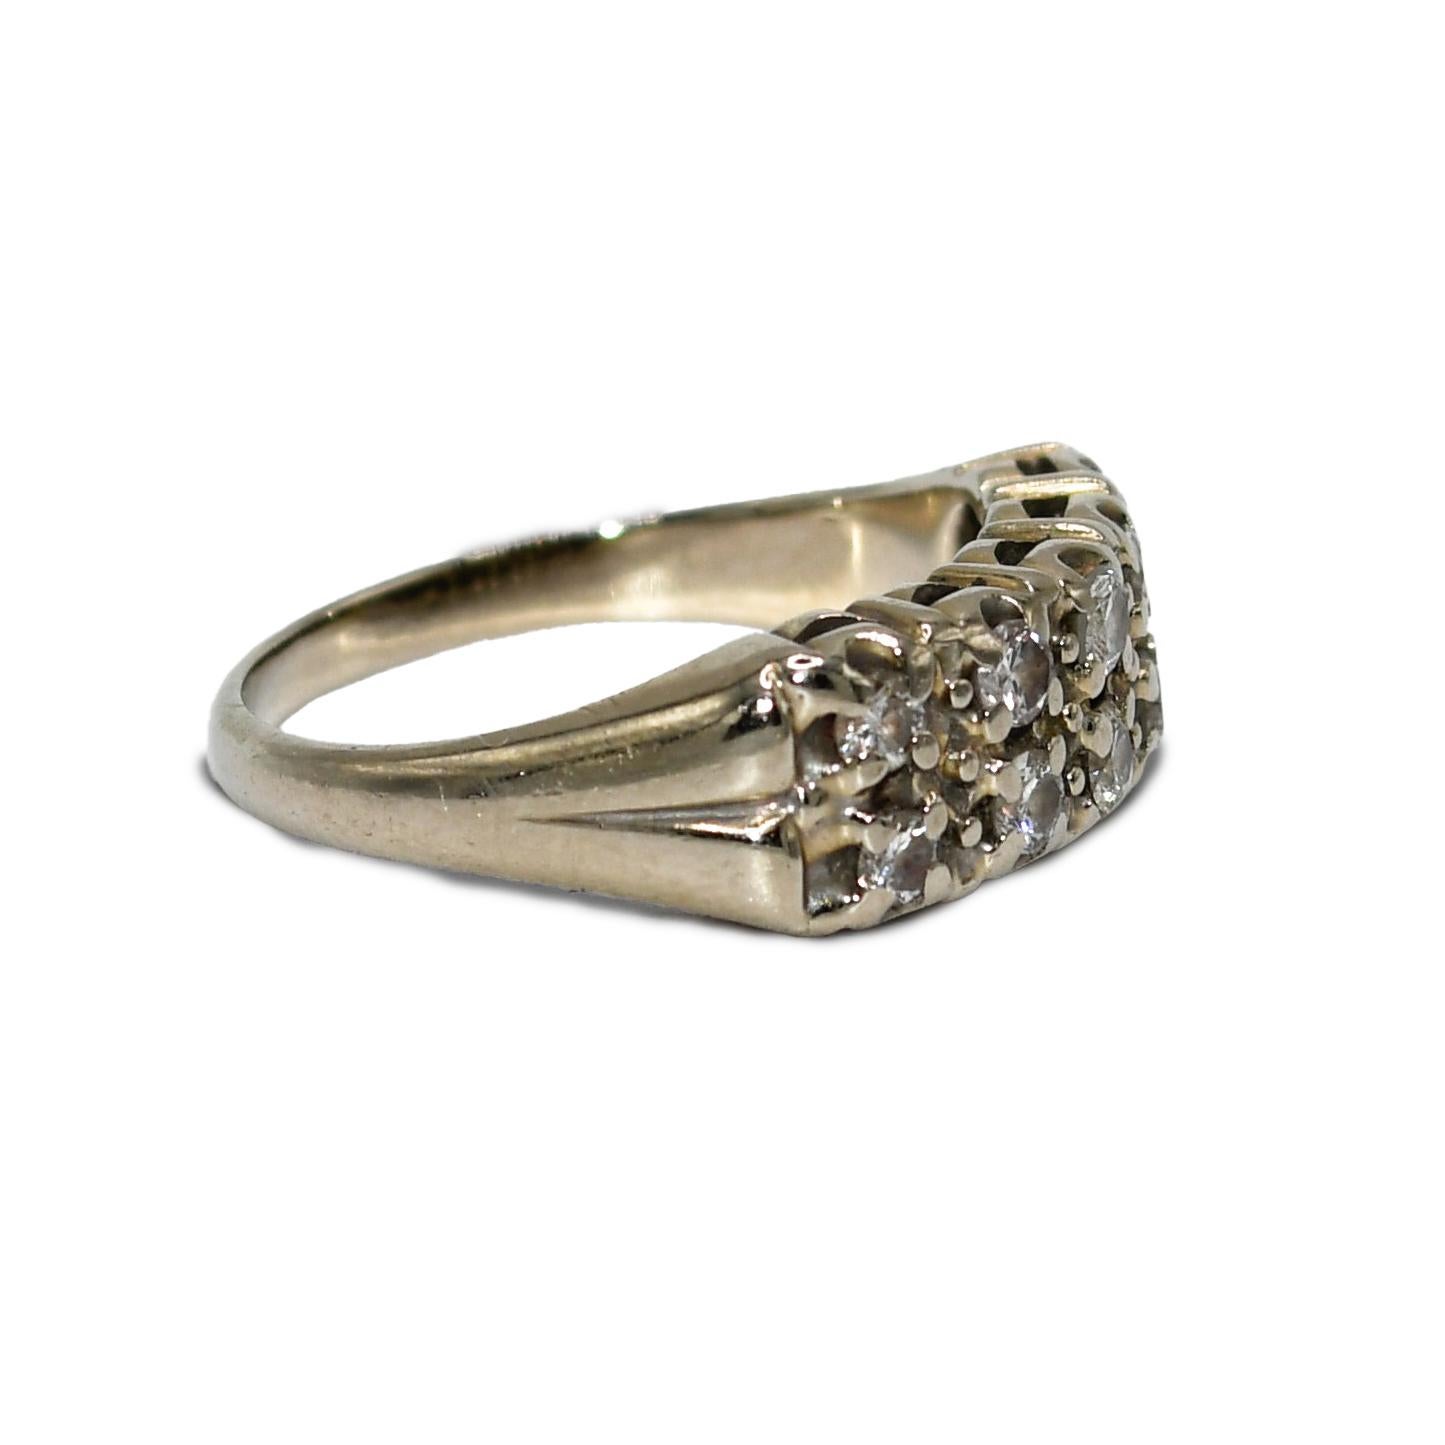 14k White Gold Diamond Ring .25tdw, 4gr
14k white gold vintage diamond ring, .25tdw round brilliant cuts.
Clarity VS, Color H-I
Stamped 14k, weighs 4gr
Size 6, can be sized for additional fee